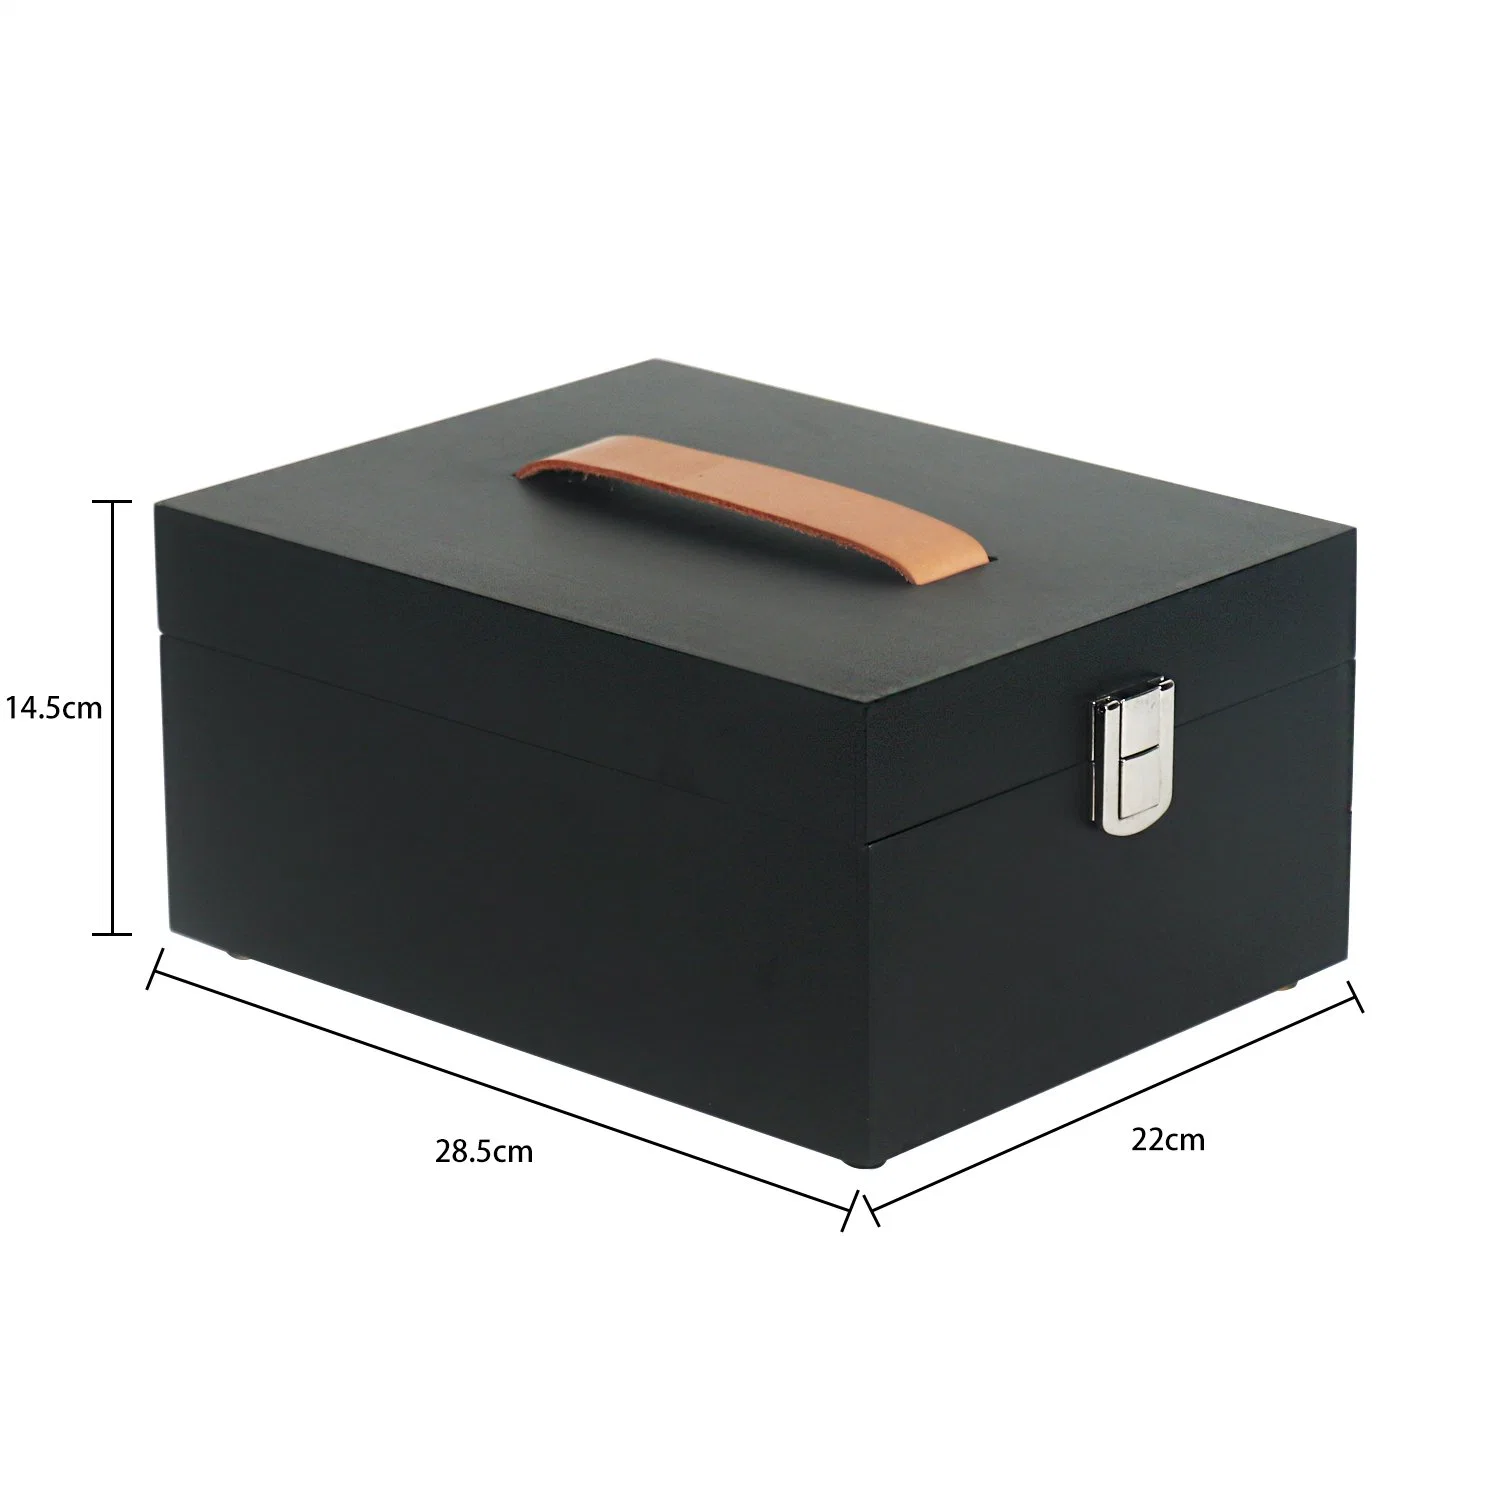 Home Decoration Europe Lockable Pine Small Wooden Treasure Jewelry Storage Box for Craft